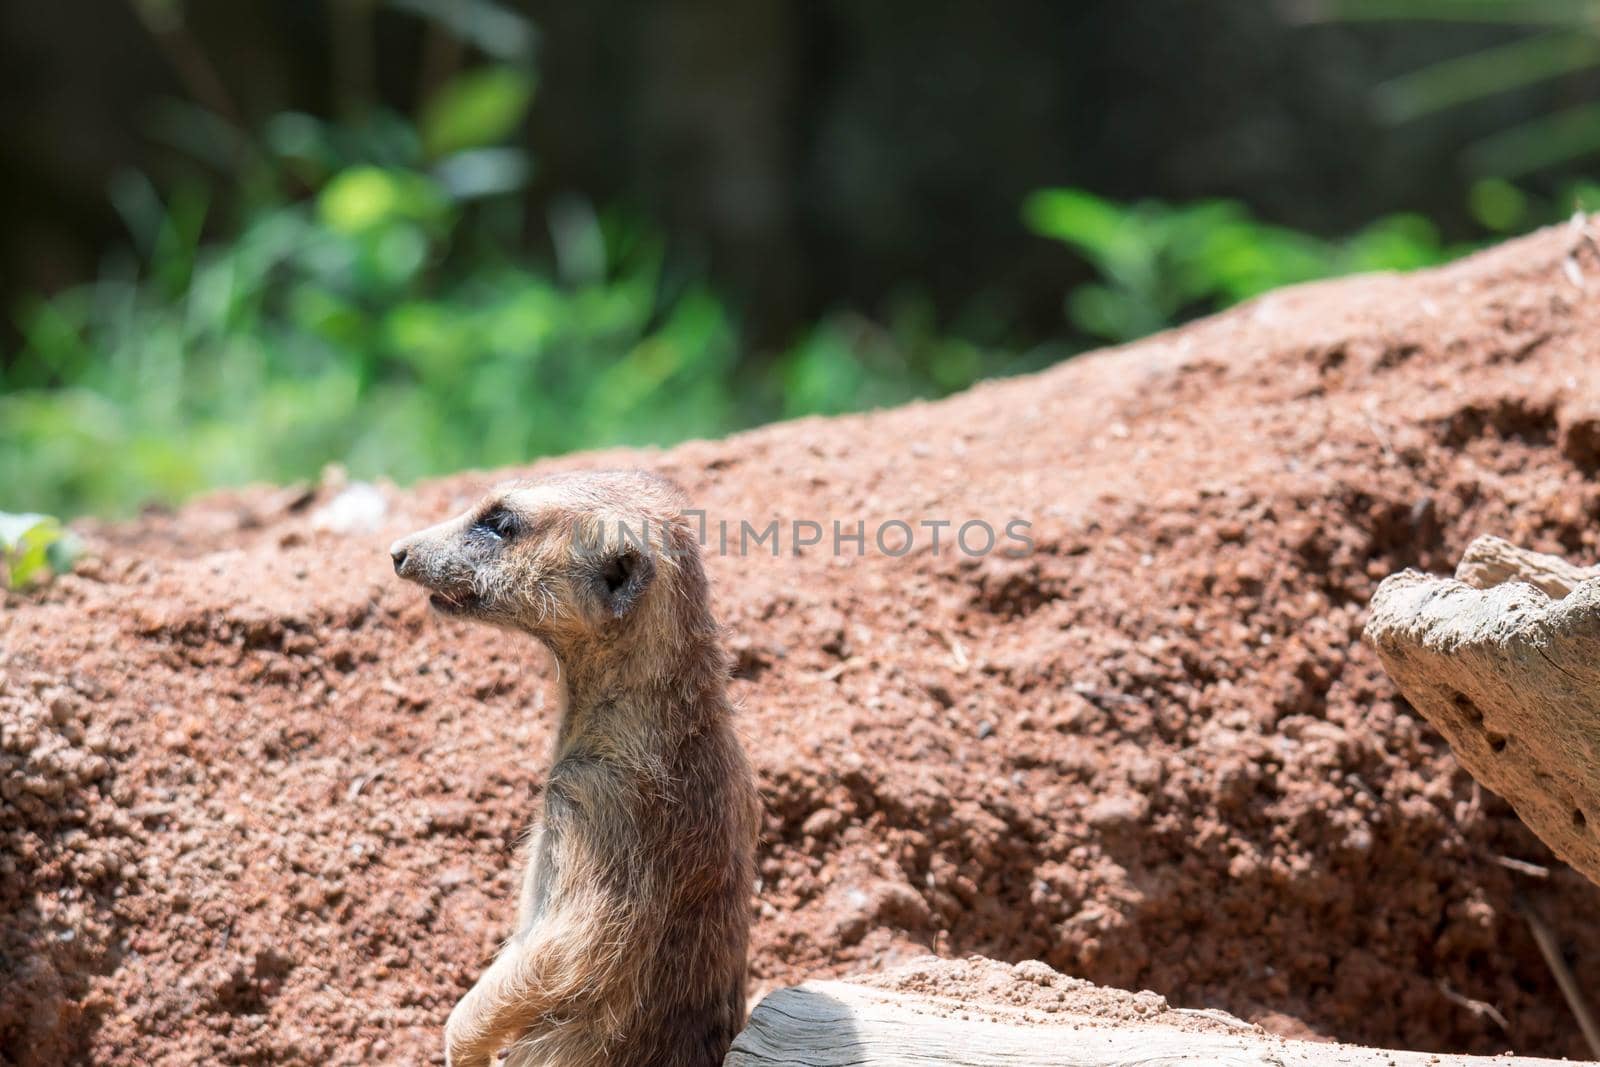 Meerkat while on a bark and observing looking around